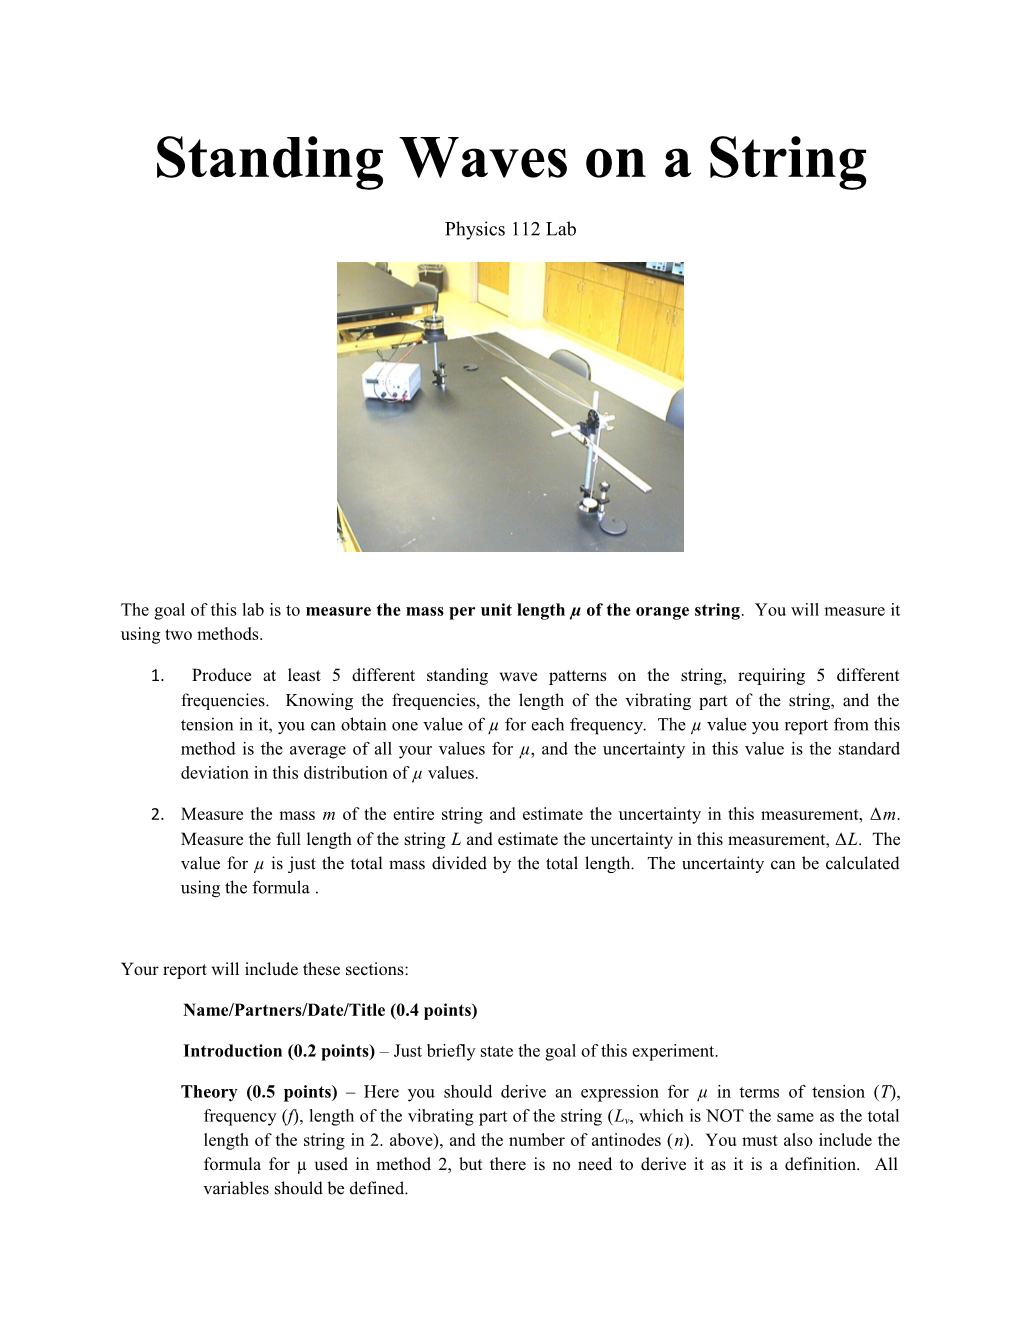 Standing Waves on a String